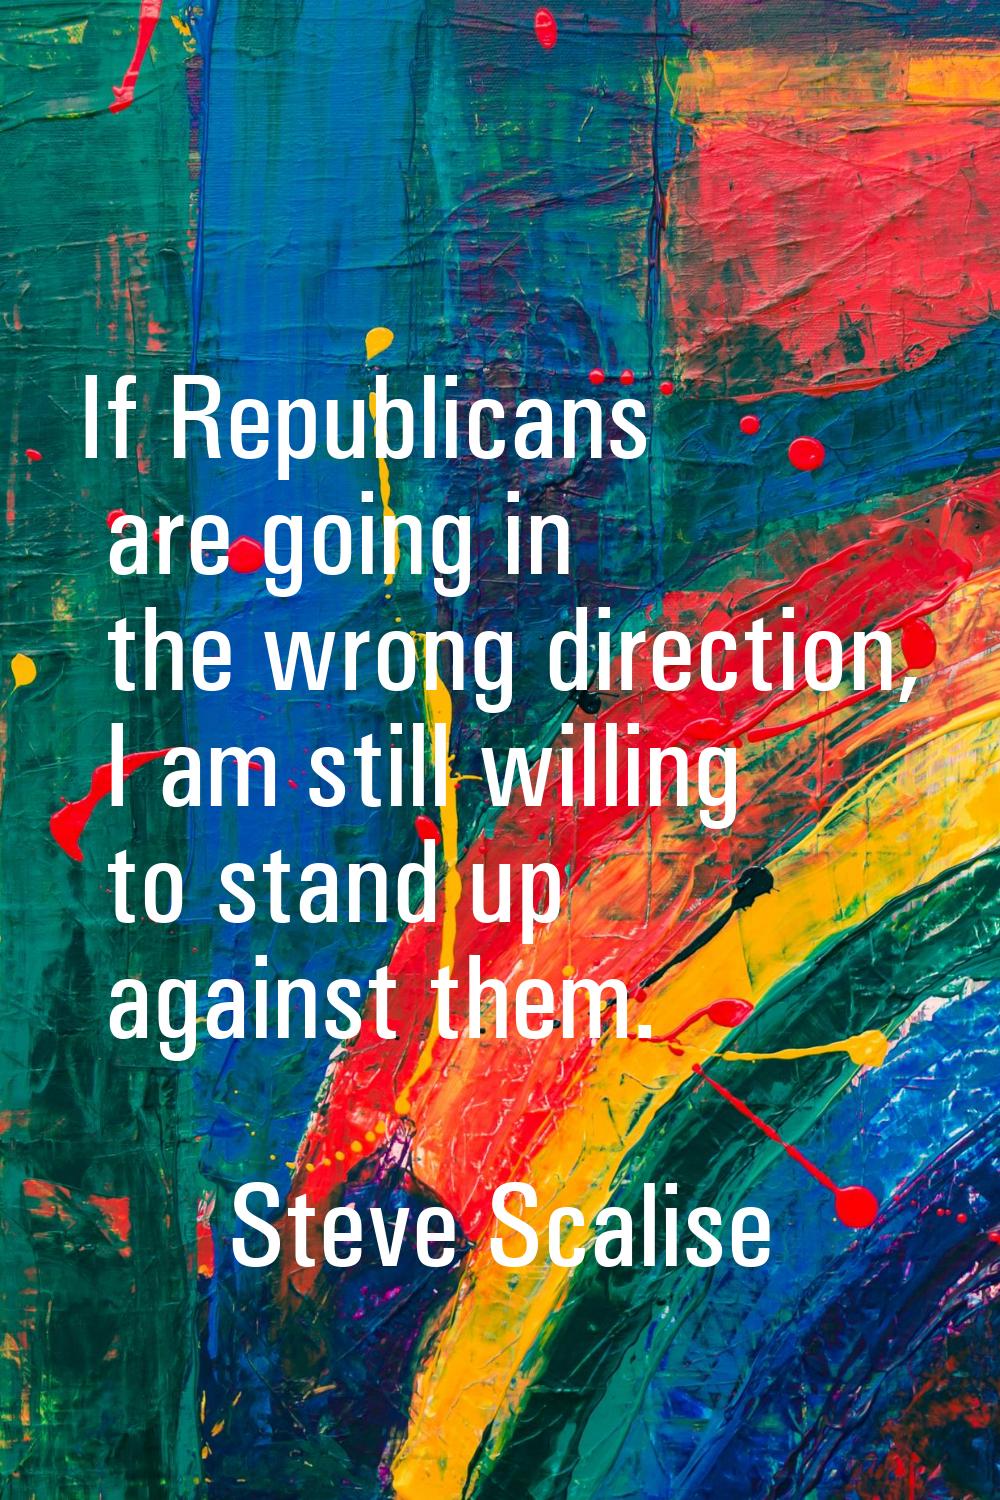 If Republicans are going in the wrong direction, I am still willing to stand up against them.